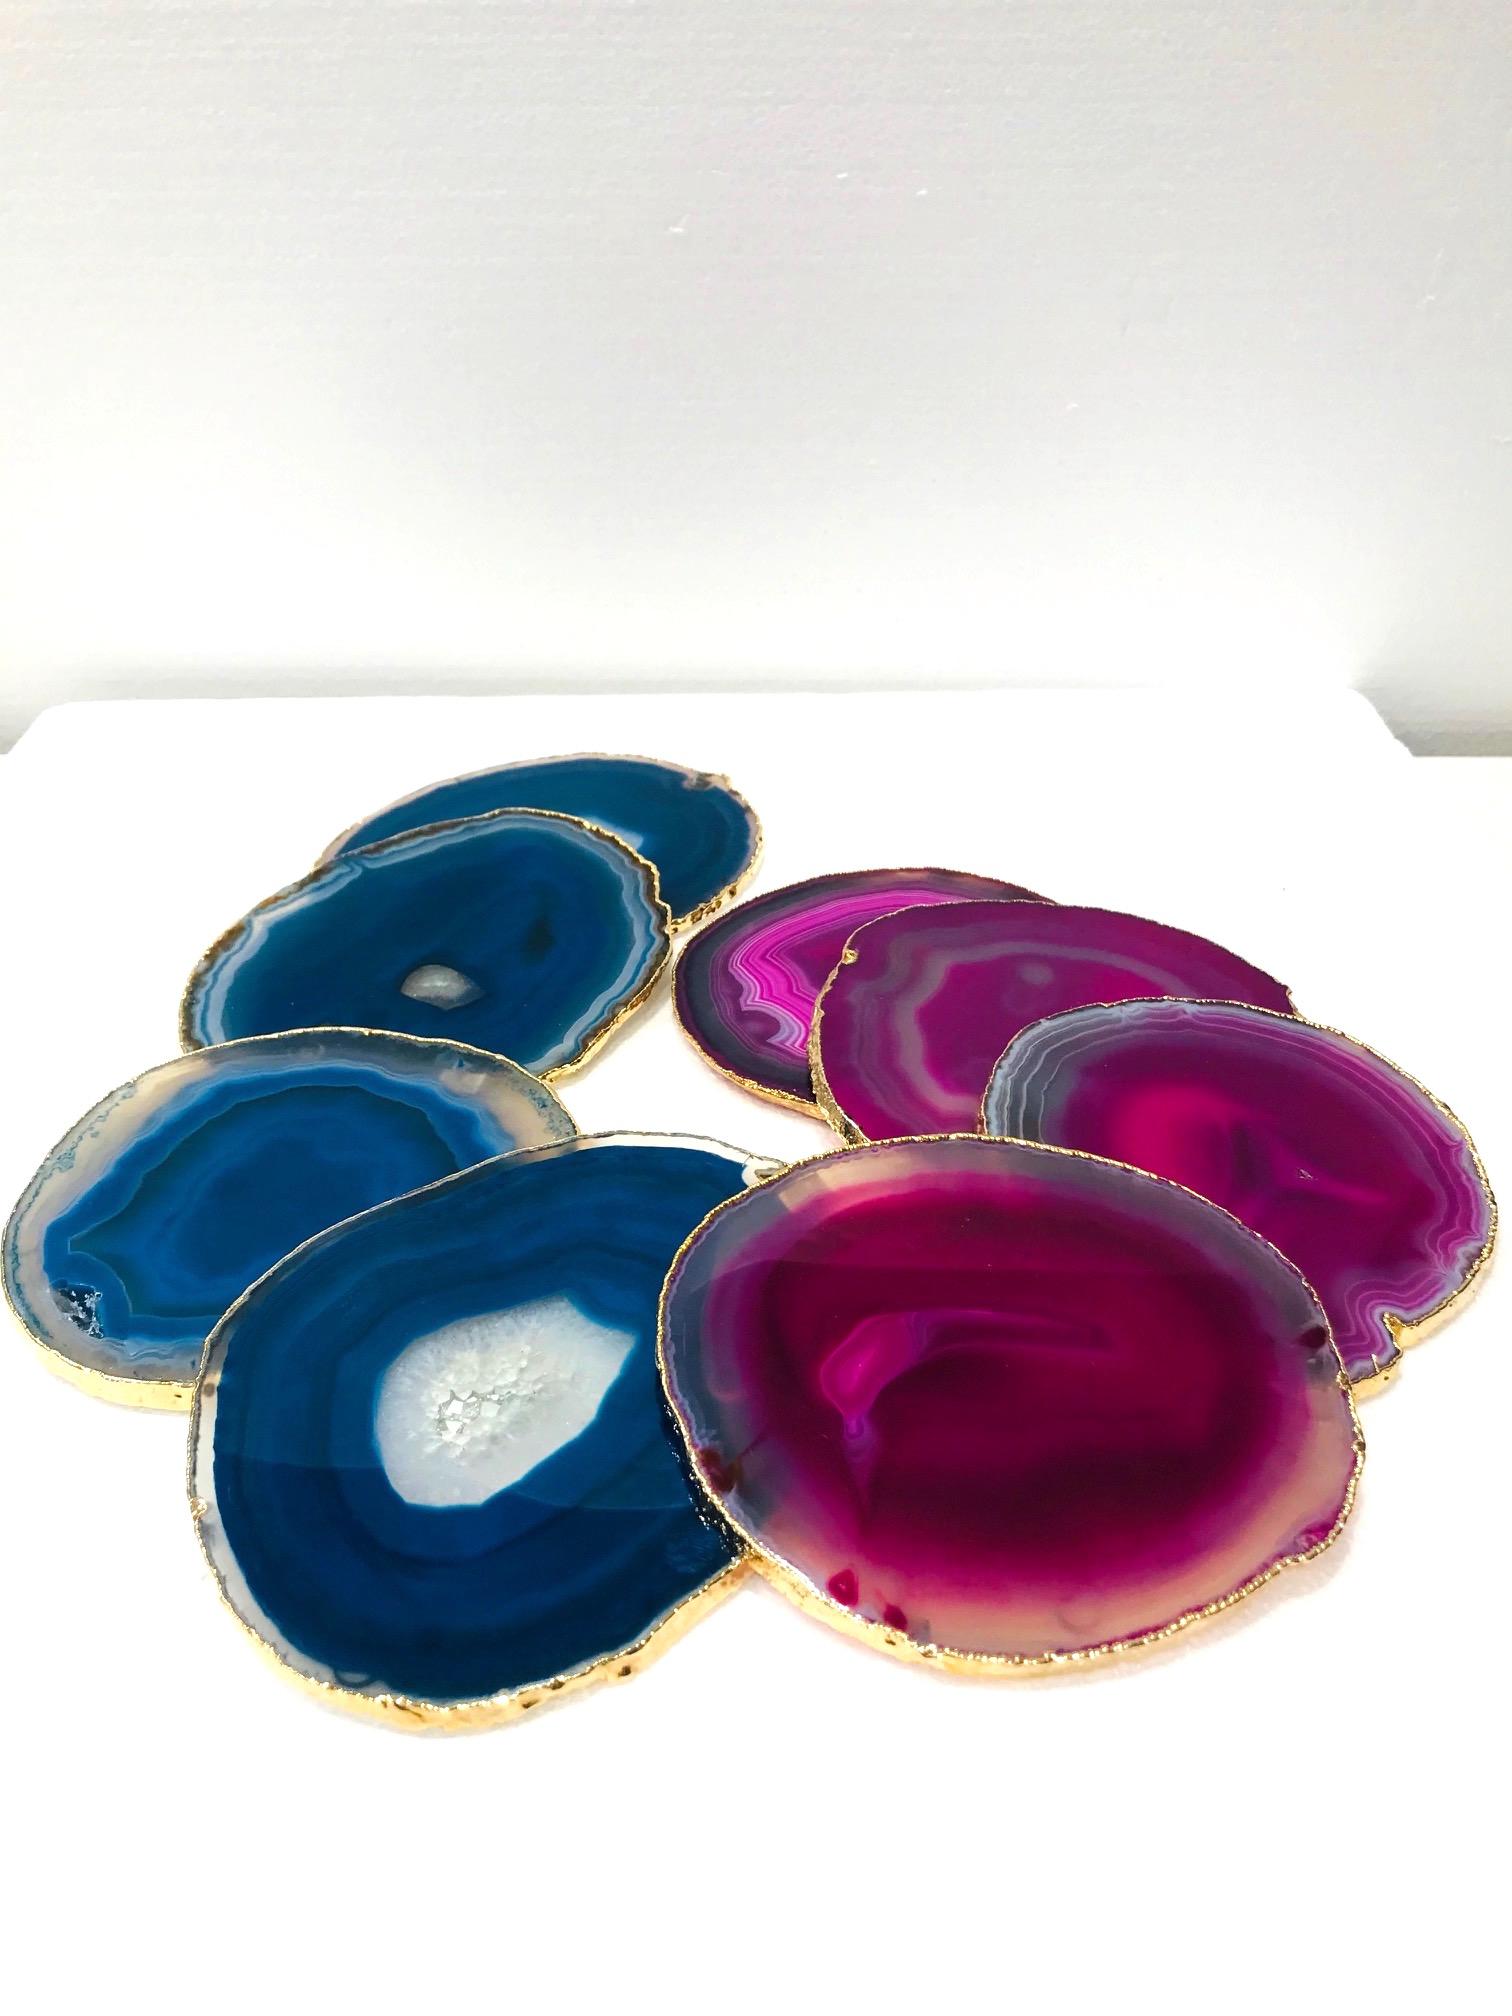 Contemporary Set/ 8 Semi-Precious Gemstone Coasters in Pink and Turquoise with 24K Gold Trim